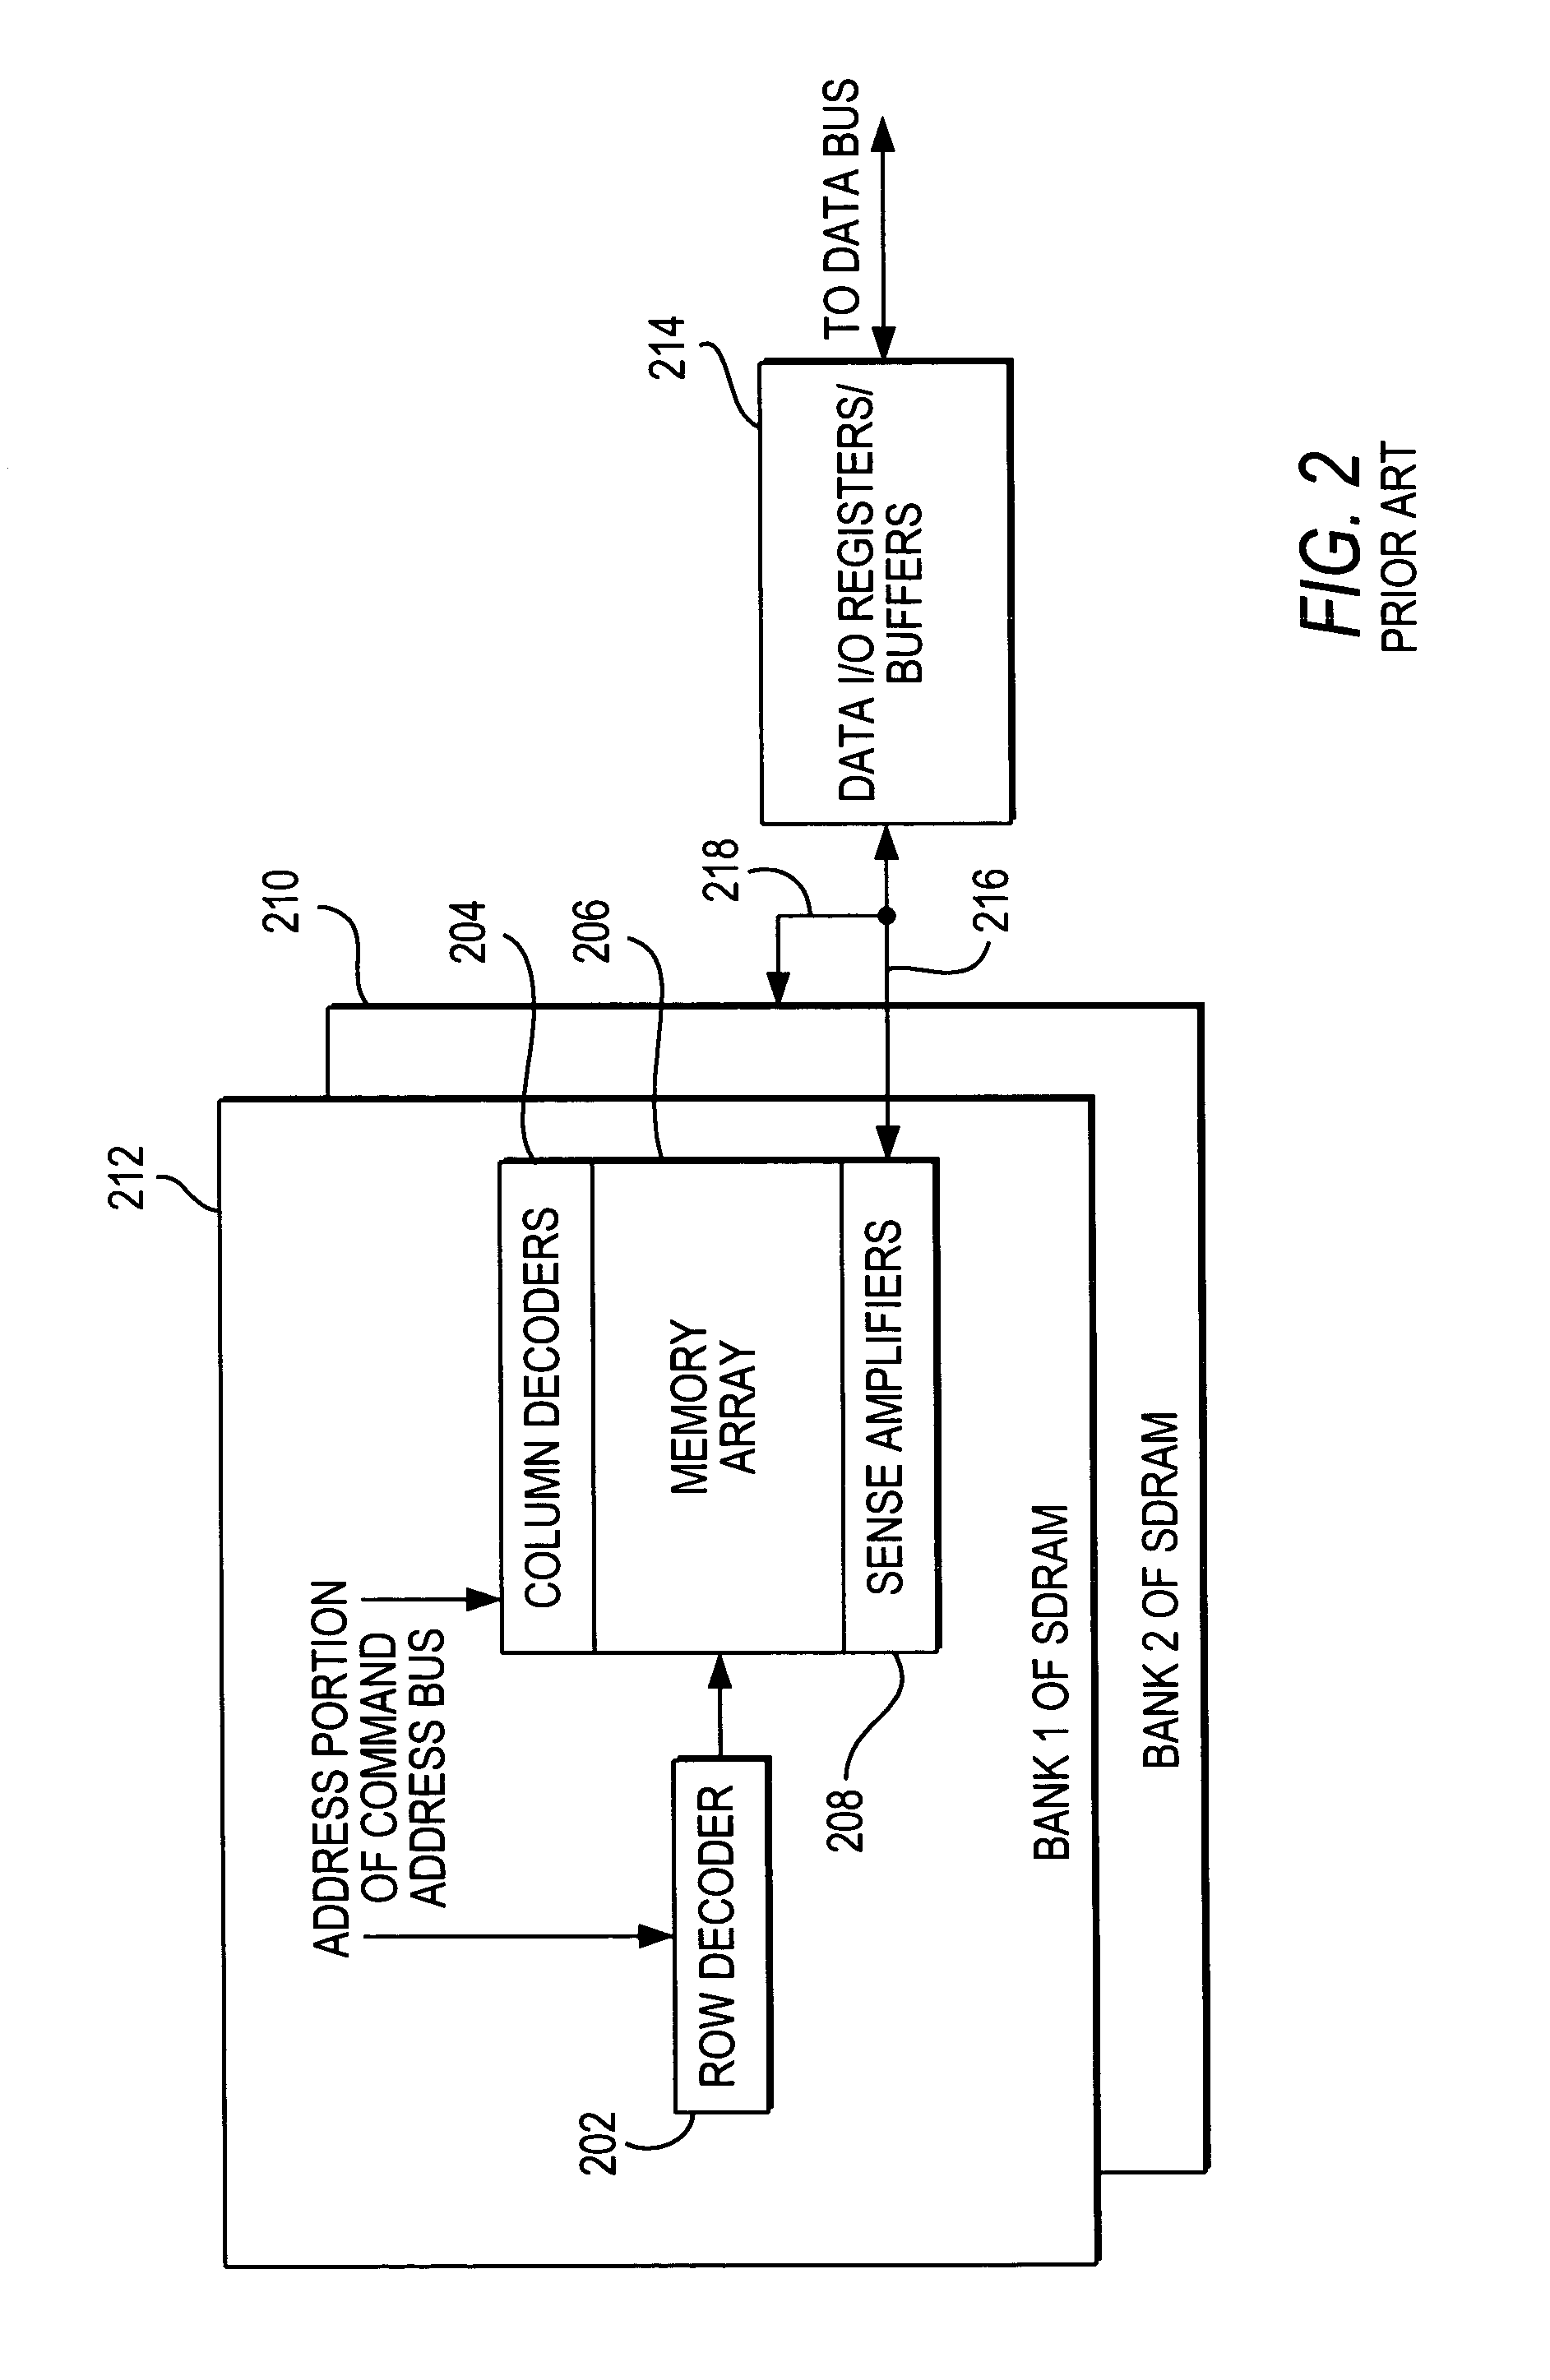 Memory devices with buffered command address bus